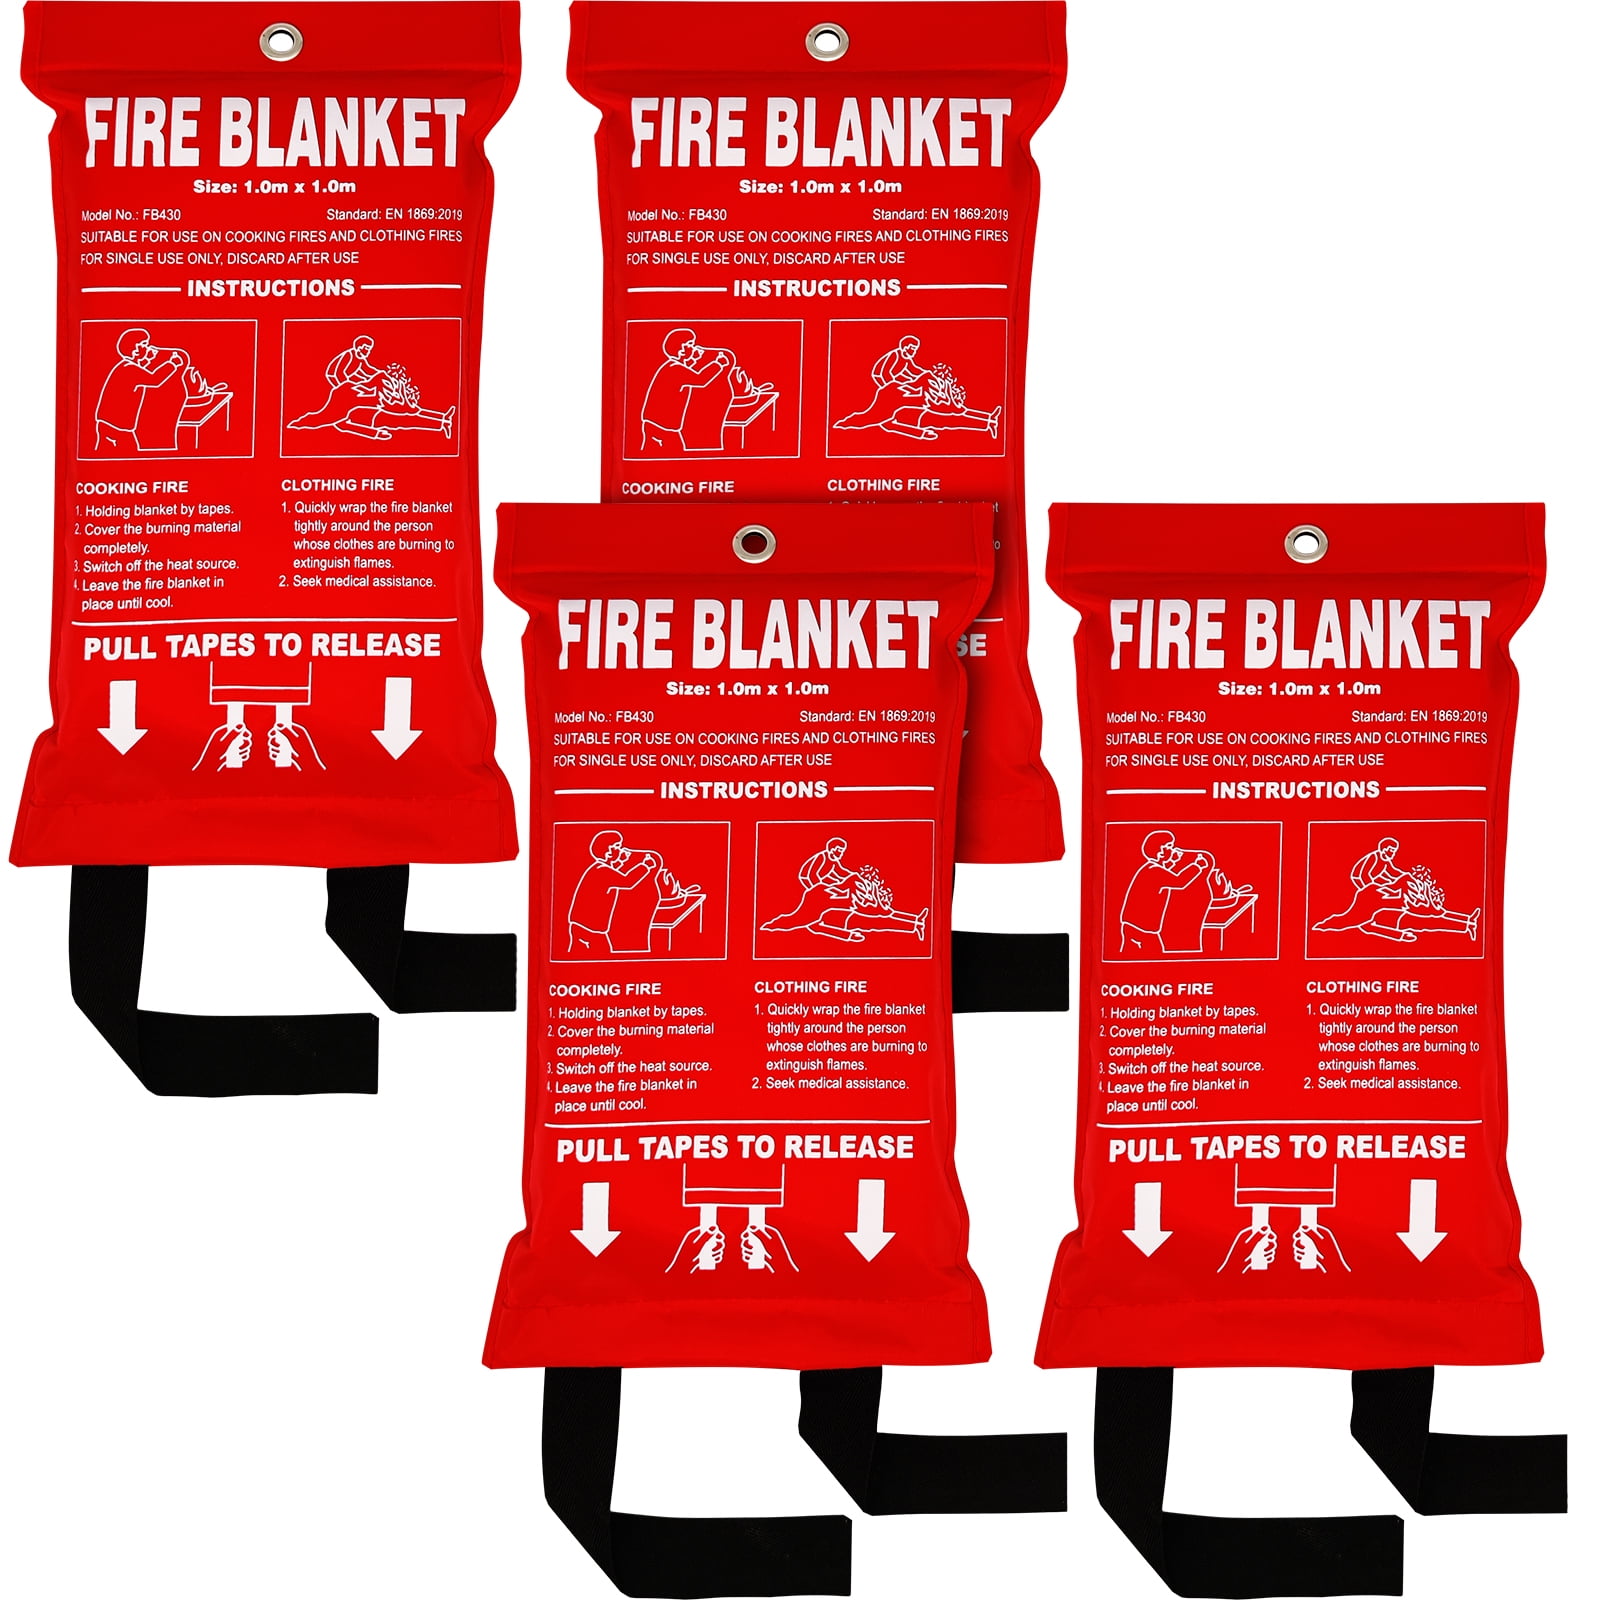 Car Office WOWDING Fire Blanket Fiberglass Fire Emergency Blanket Suppression Blanket Flame Retardant Blanket Fire Safety Kit Emergency Survival Safety Cover for Kitchen Fireplace Warehouse 